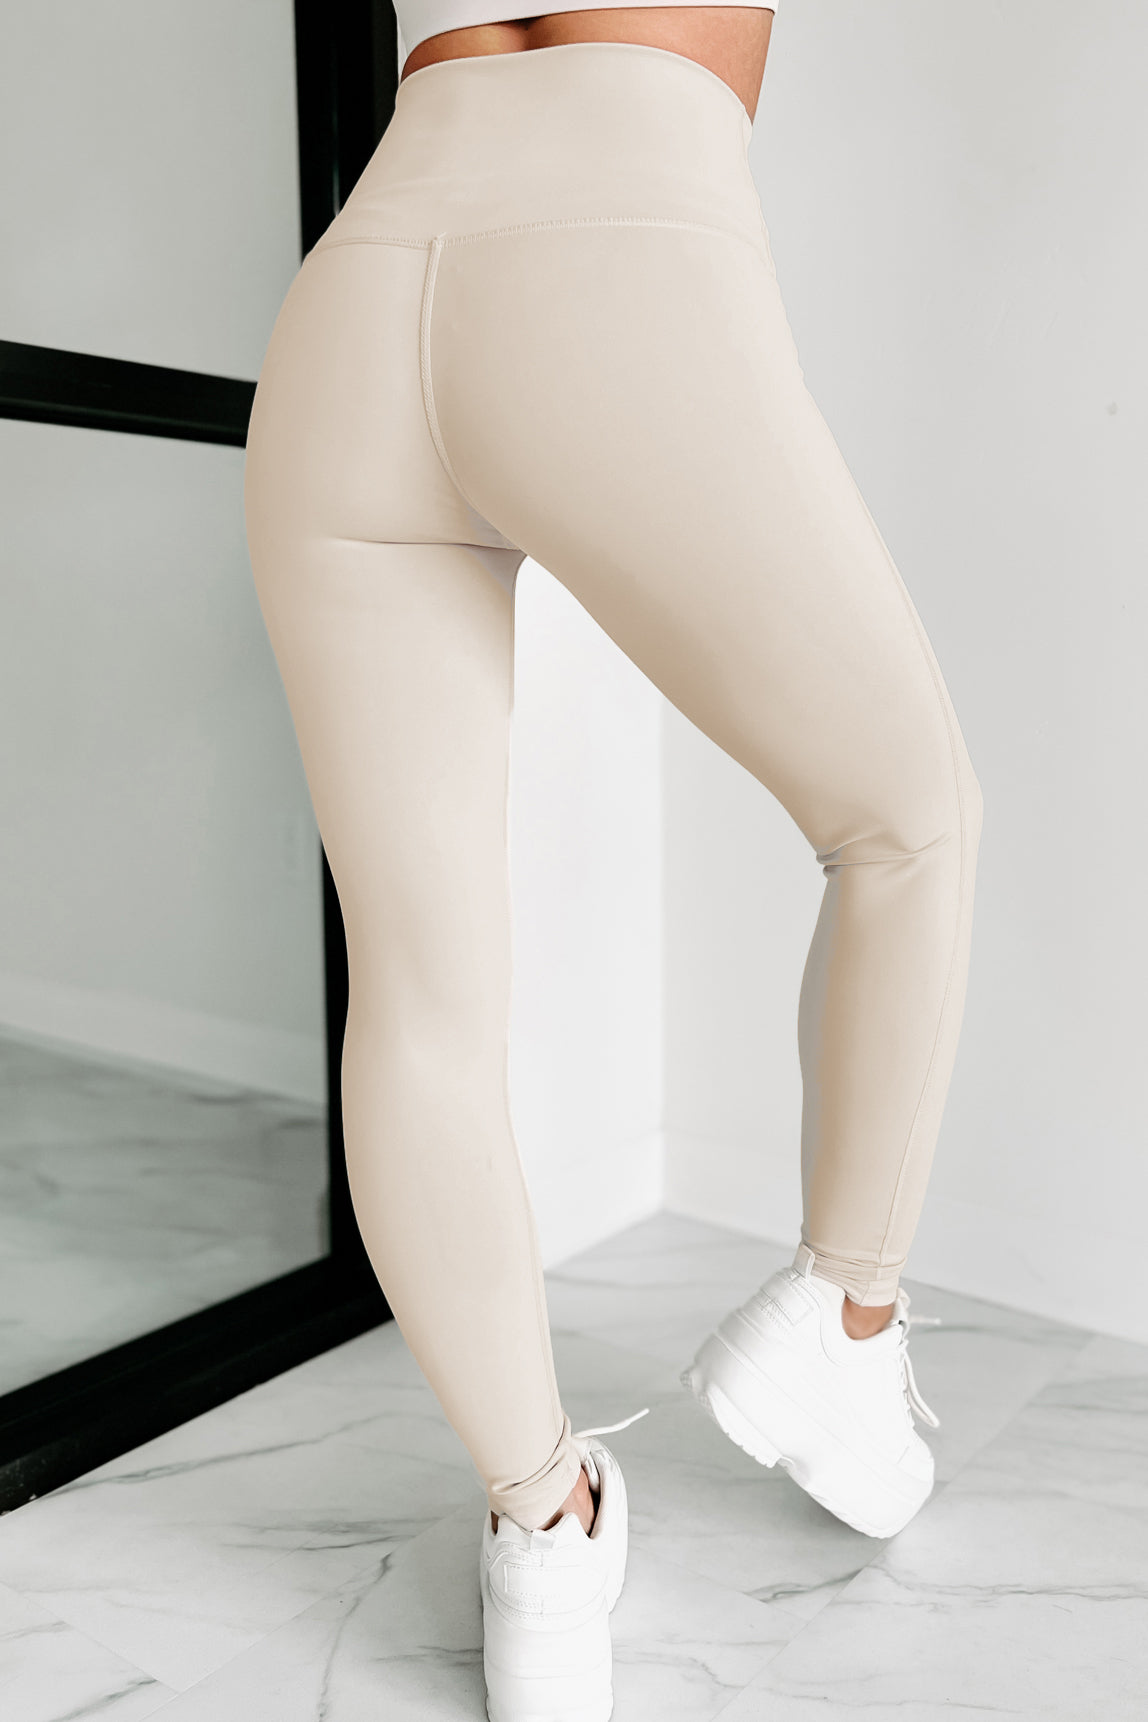 Out Here Lifting Weights Two Piece Legging Set (Beige)